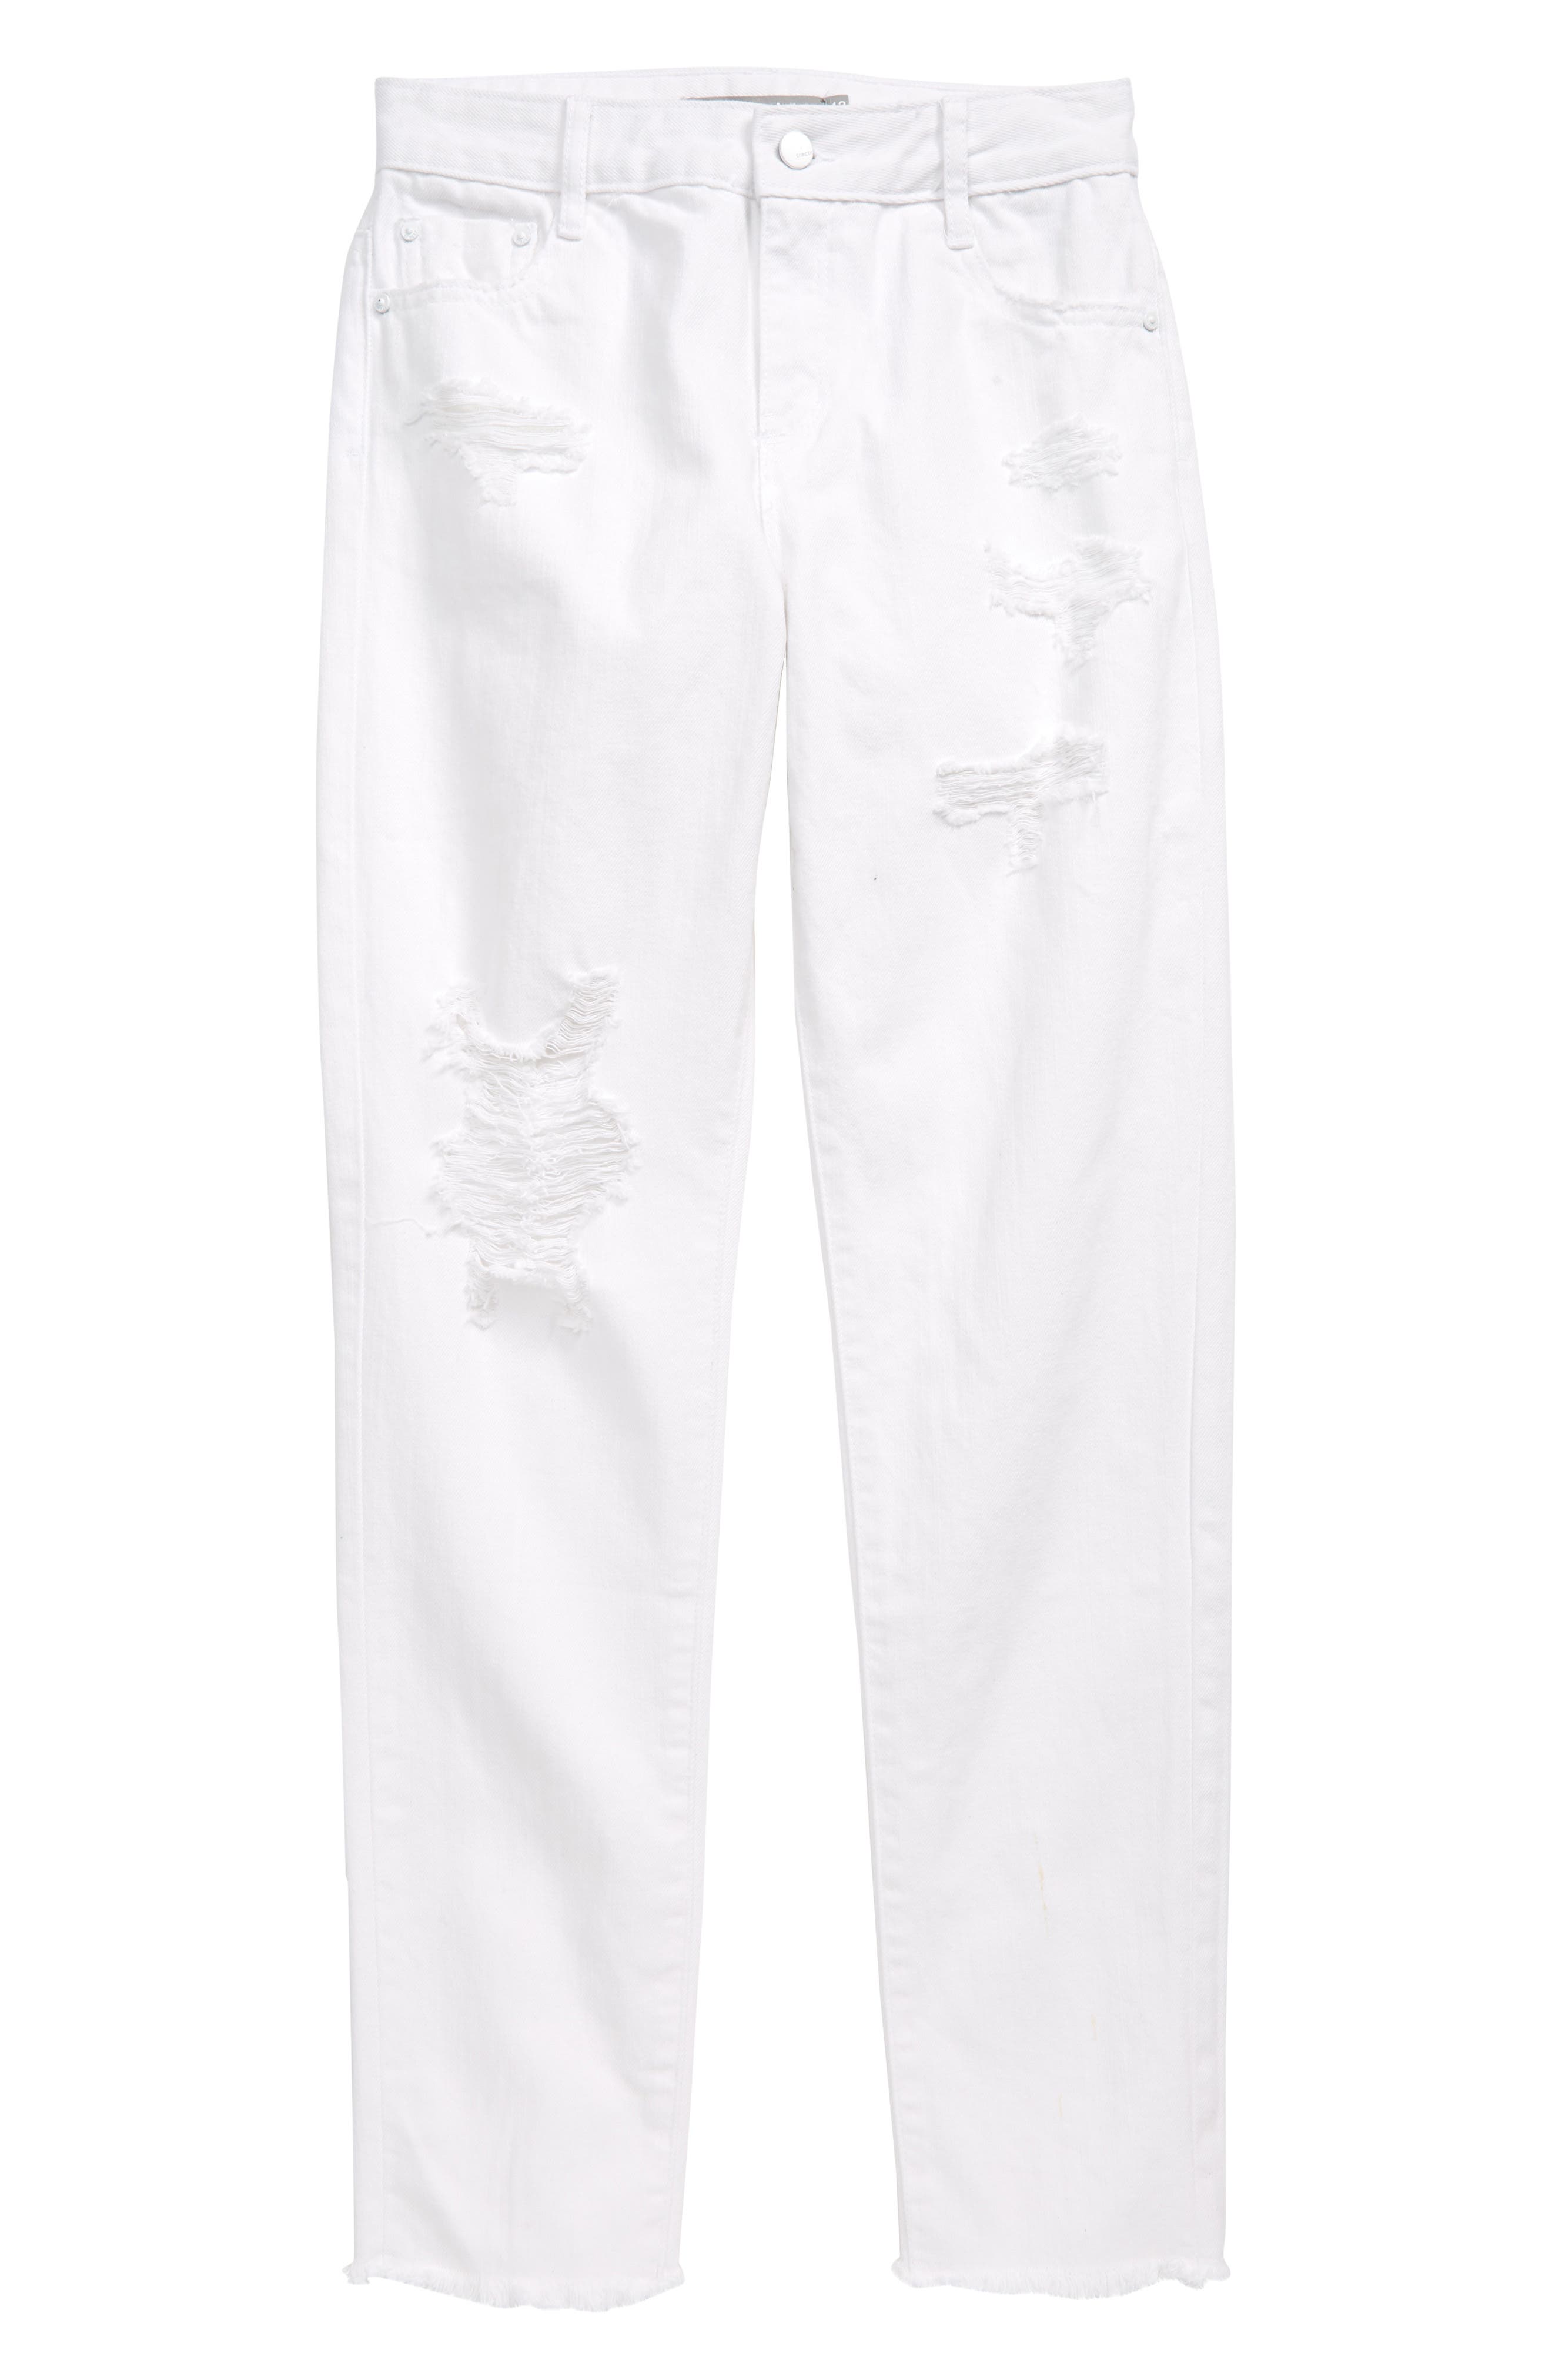 tractr white jeans